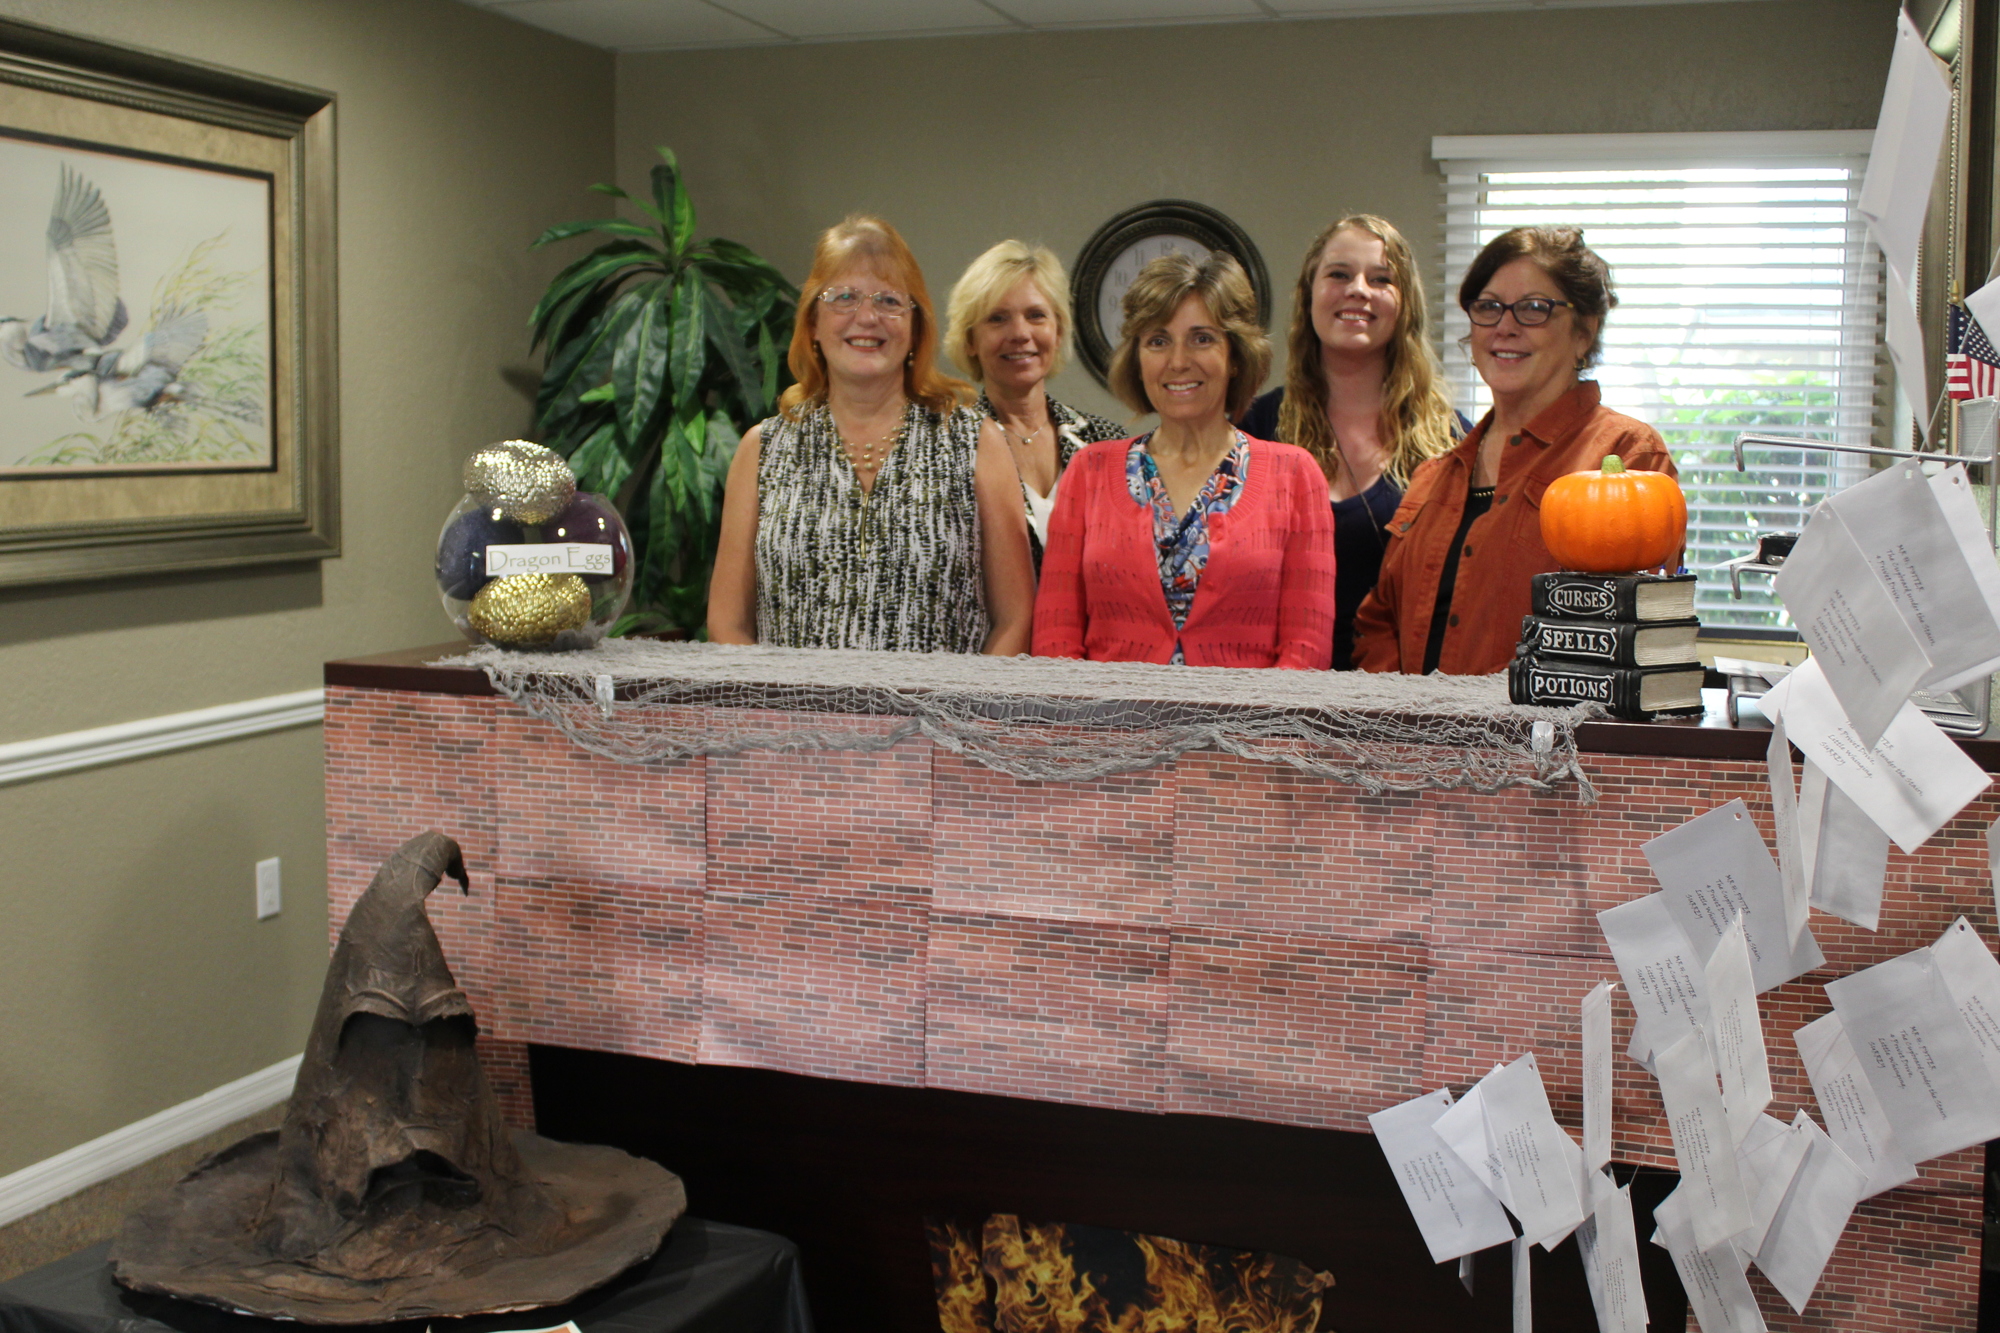 Joan Burnett, Janet Dannehower, Dulce Monahan, Krista Thompson and Elain Soriano pose behind Rager's Harry potter-themed reception desk. Not pictured are Nancy Eddy, Bev McNair, Deana Freschette and Renae Cowdell. Photo by Jarleene Almenas